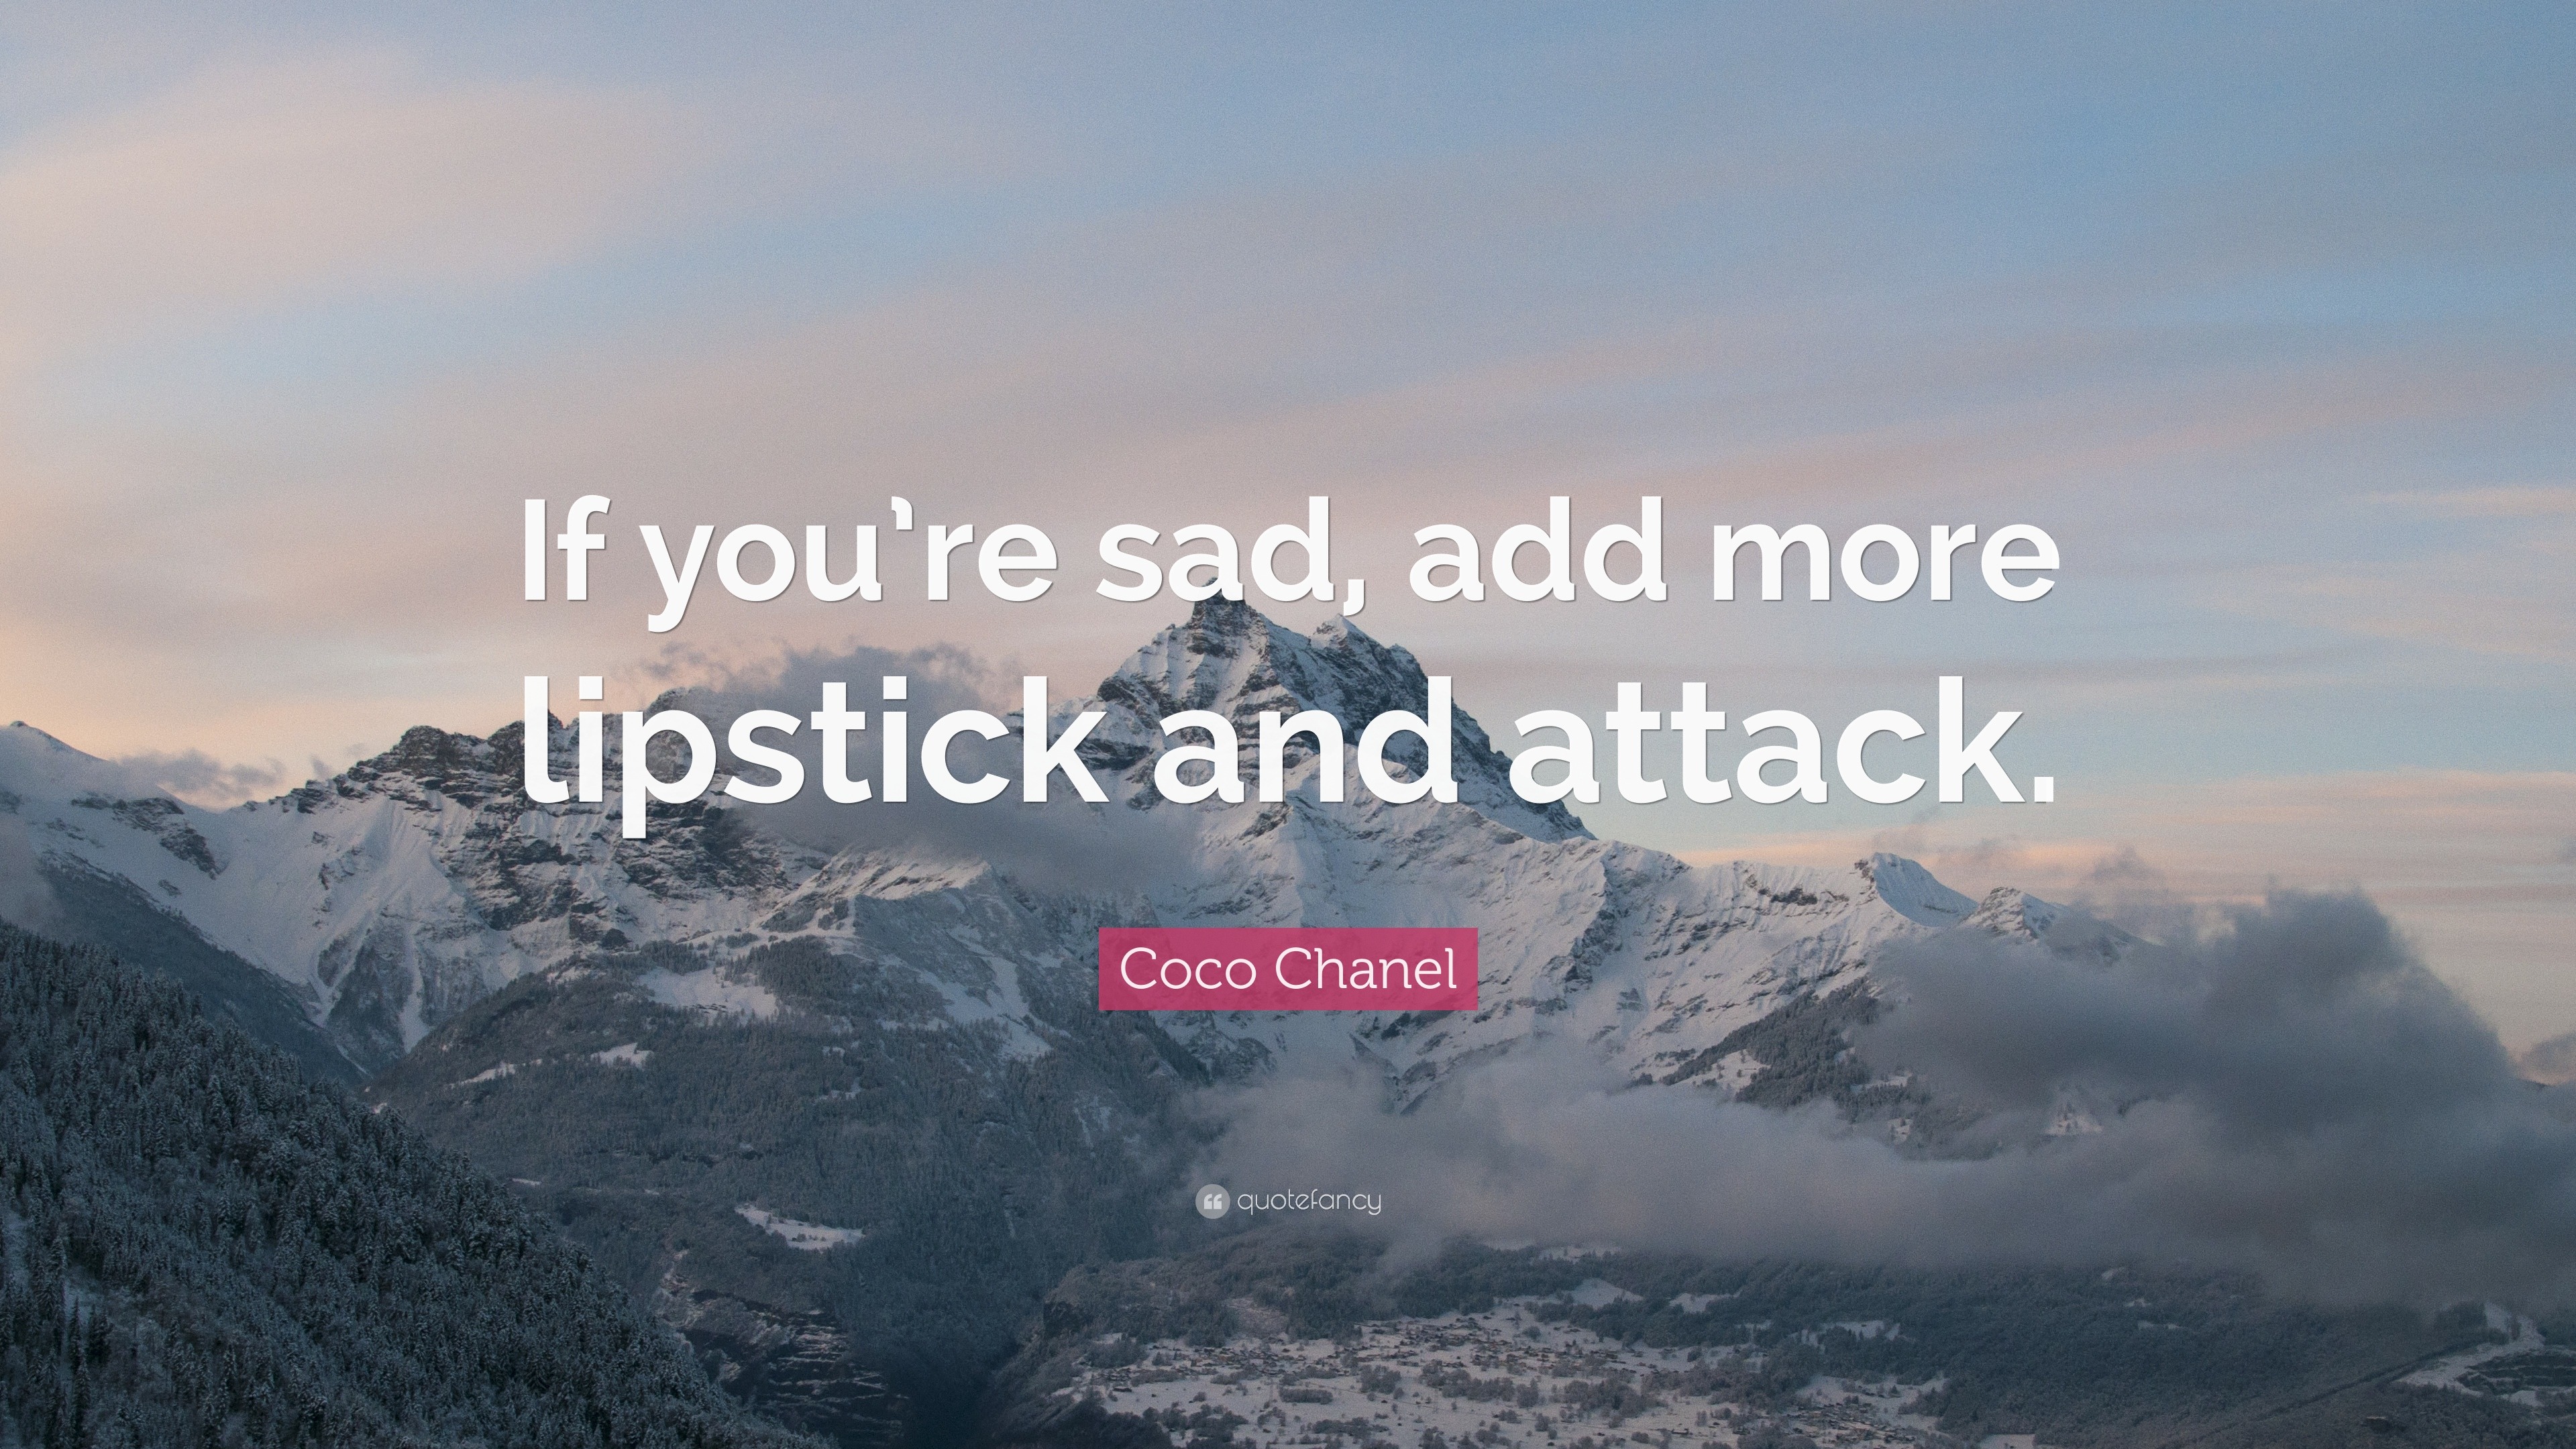 Lipstick Quotes To Live By In Your 30s